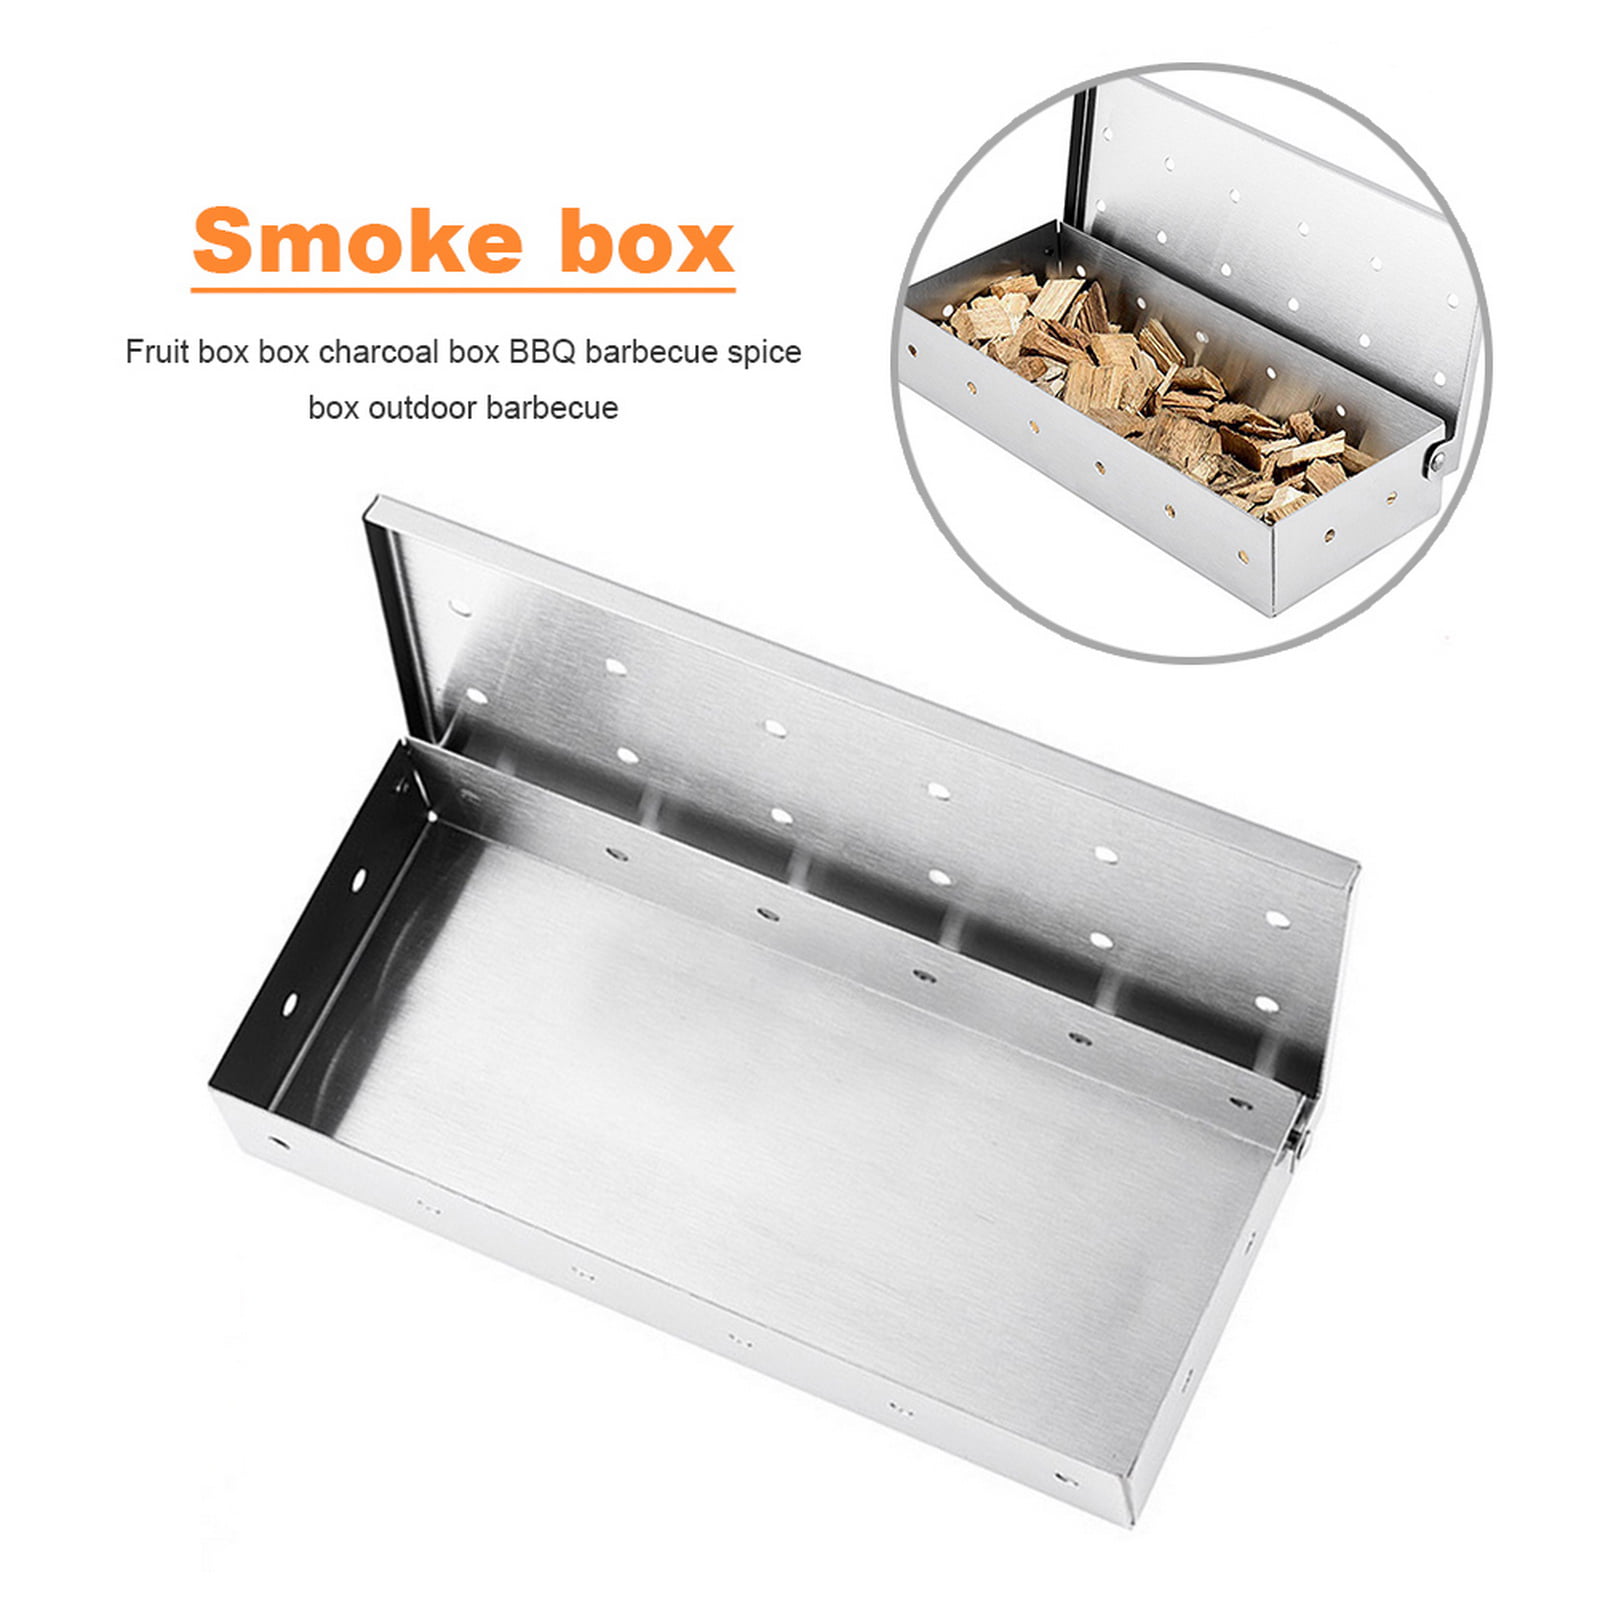 Stainless Steel BBQ Grilling Meat Smokers Box for Wood Chips Best Barbecue Accessories on Gas Charcoal Grill Silver Smoker Box 